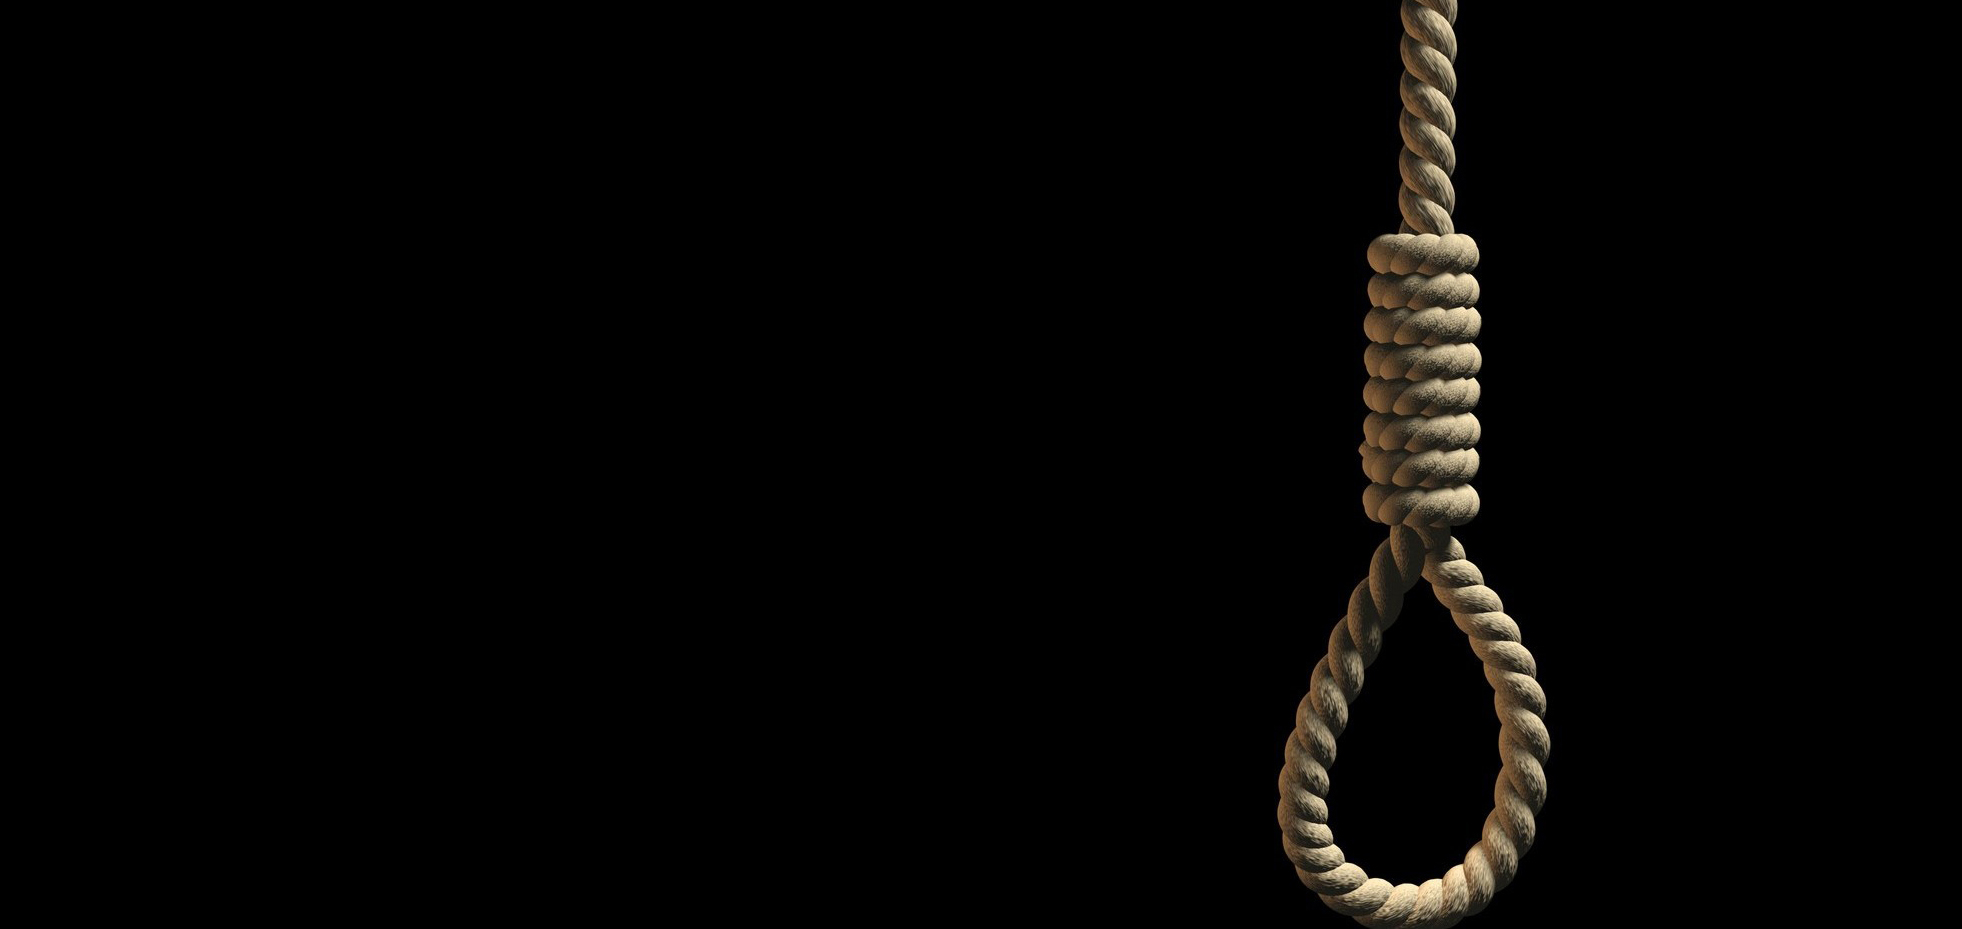 A hangman's noose on black background